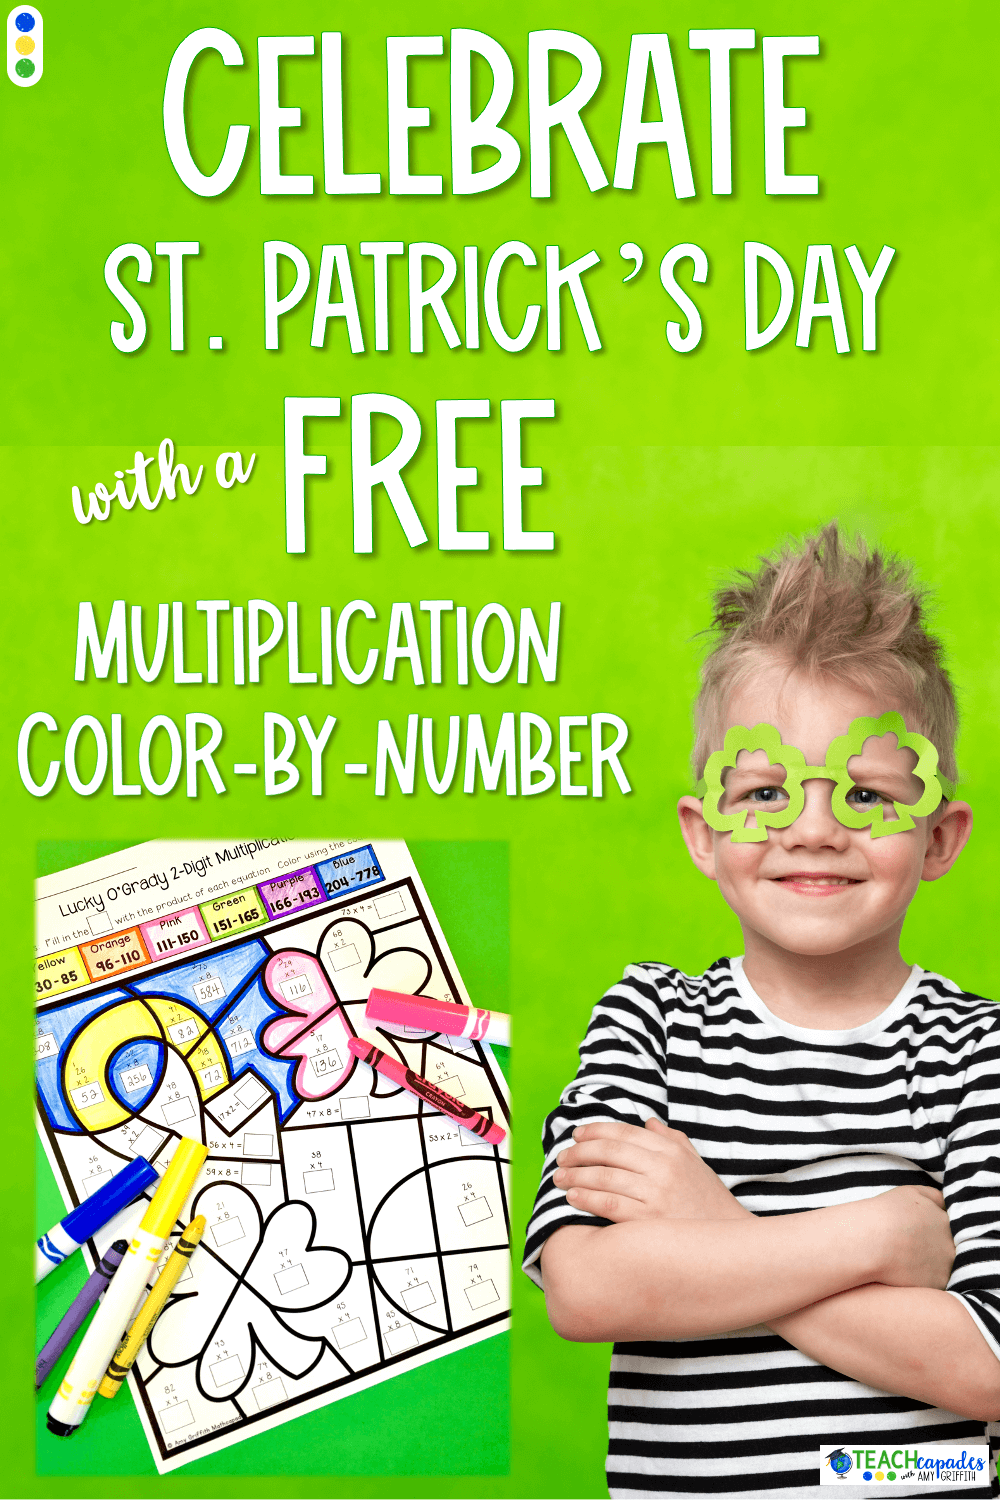 free-st-patrick-s-multiplication-color-by-number-activity